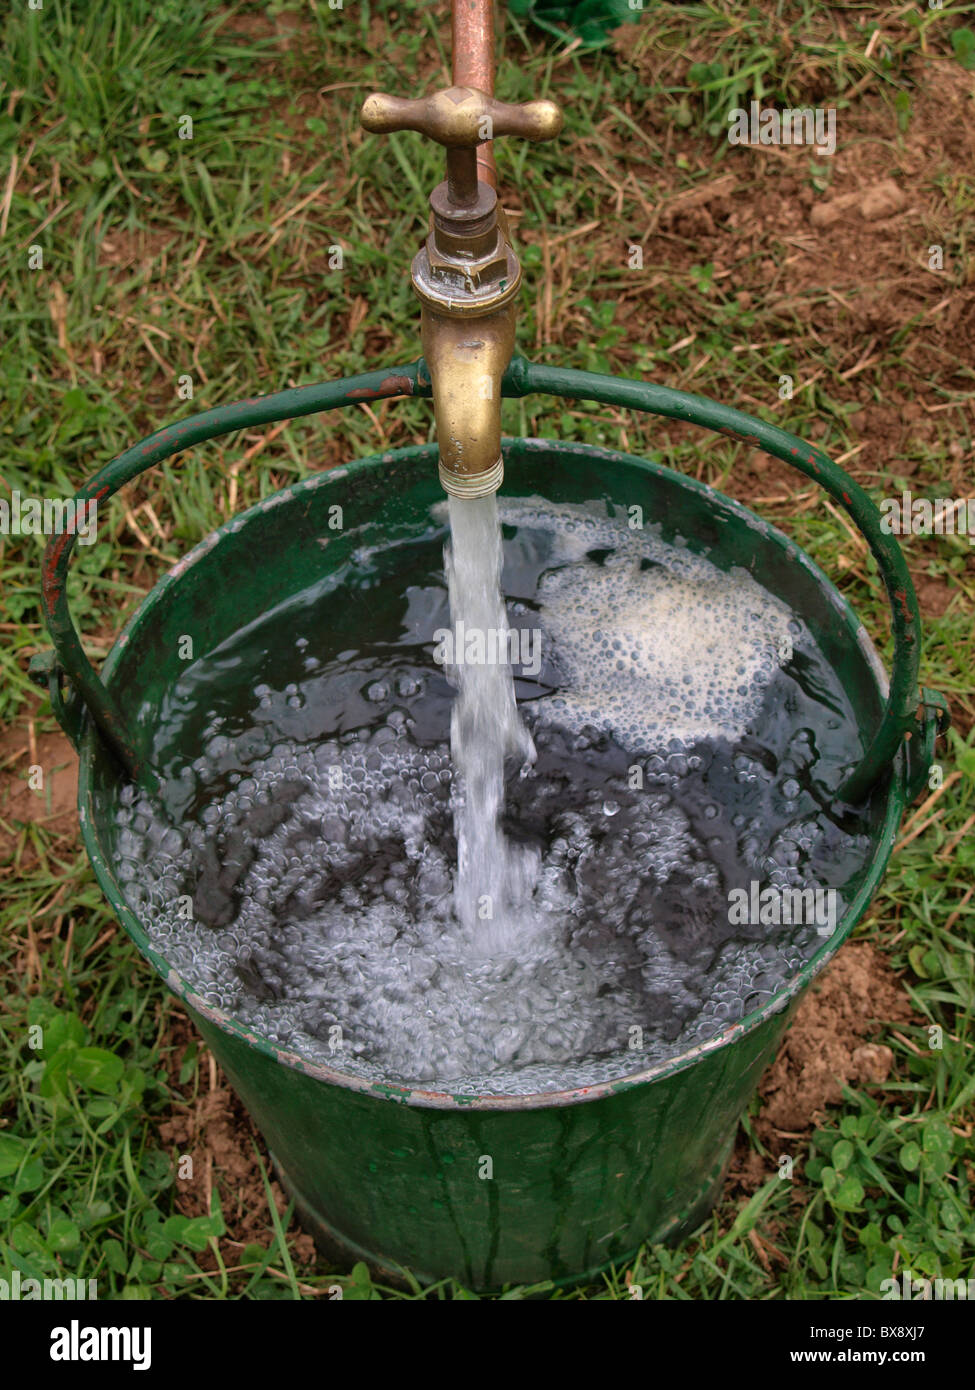 Bucket being filled with water, UK Stock Photo - Alamy